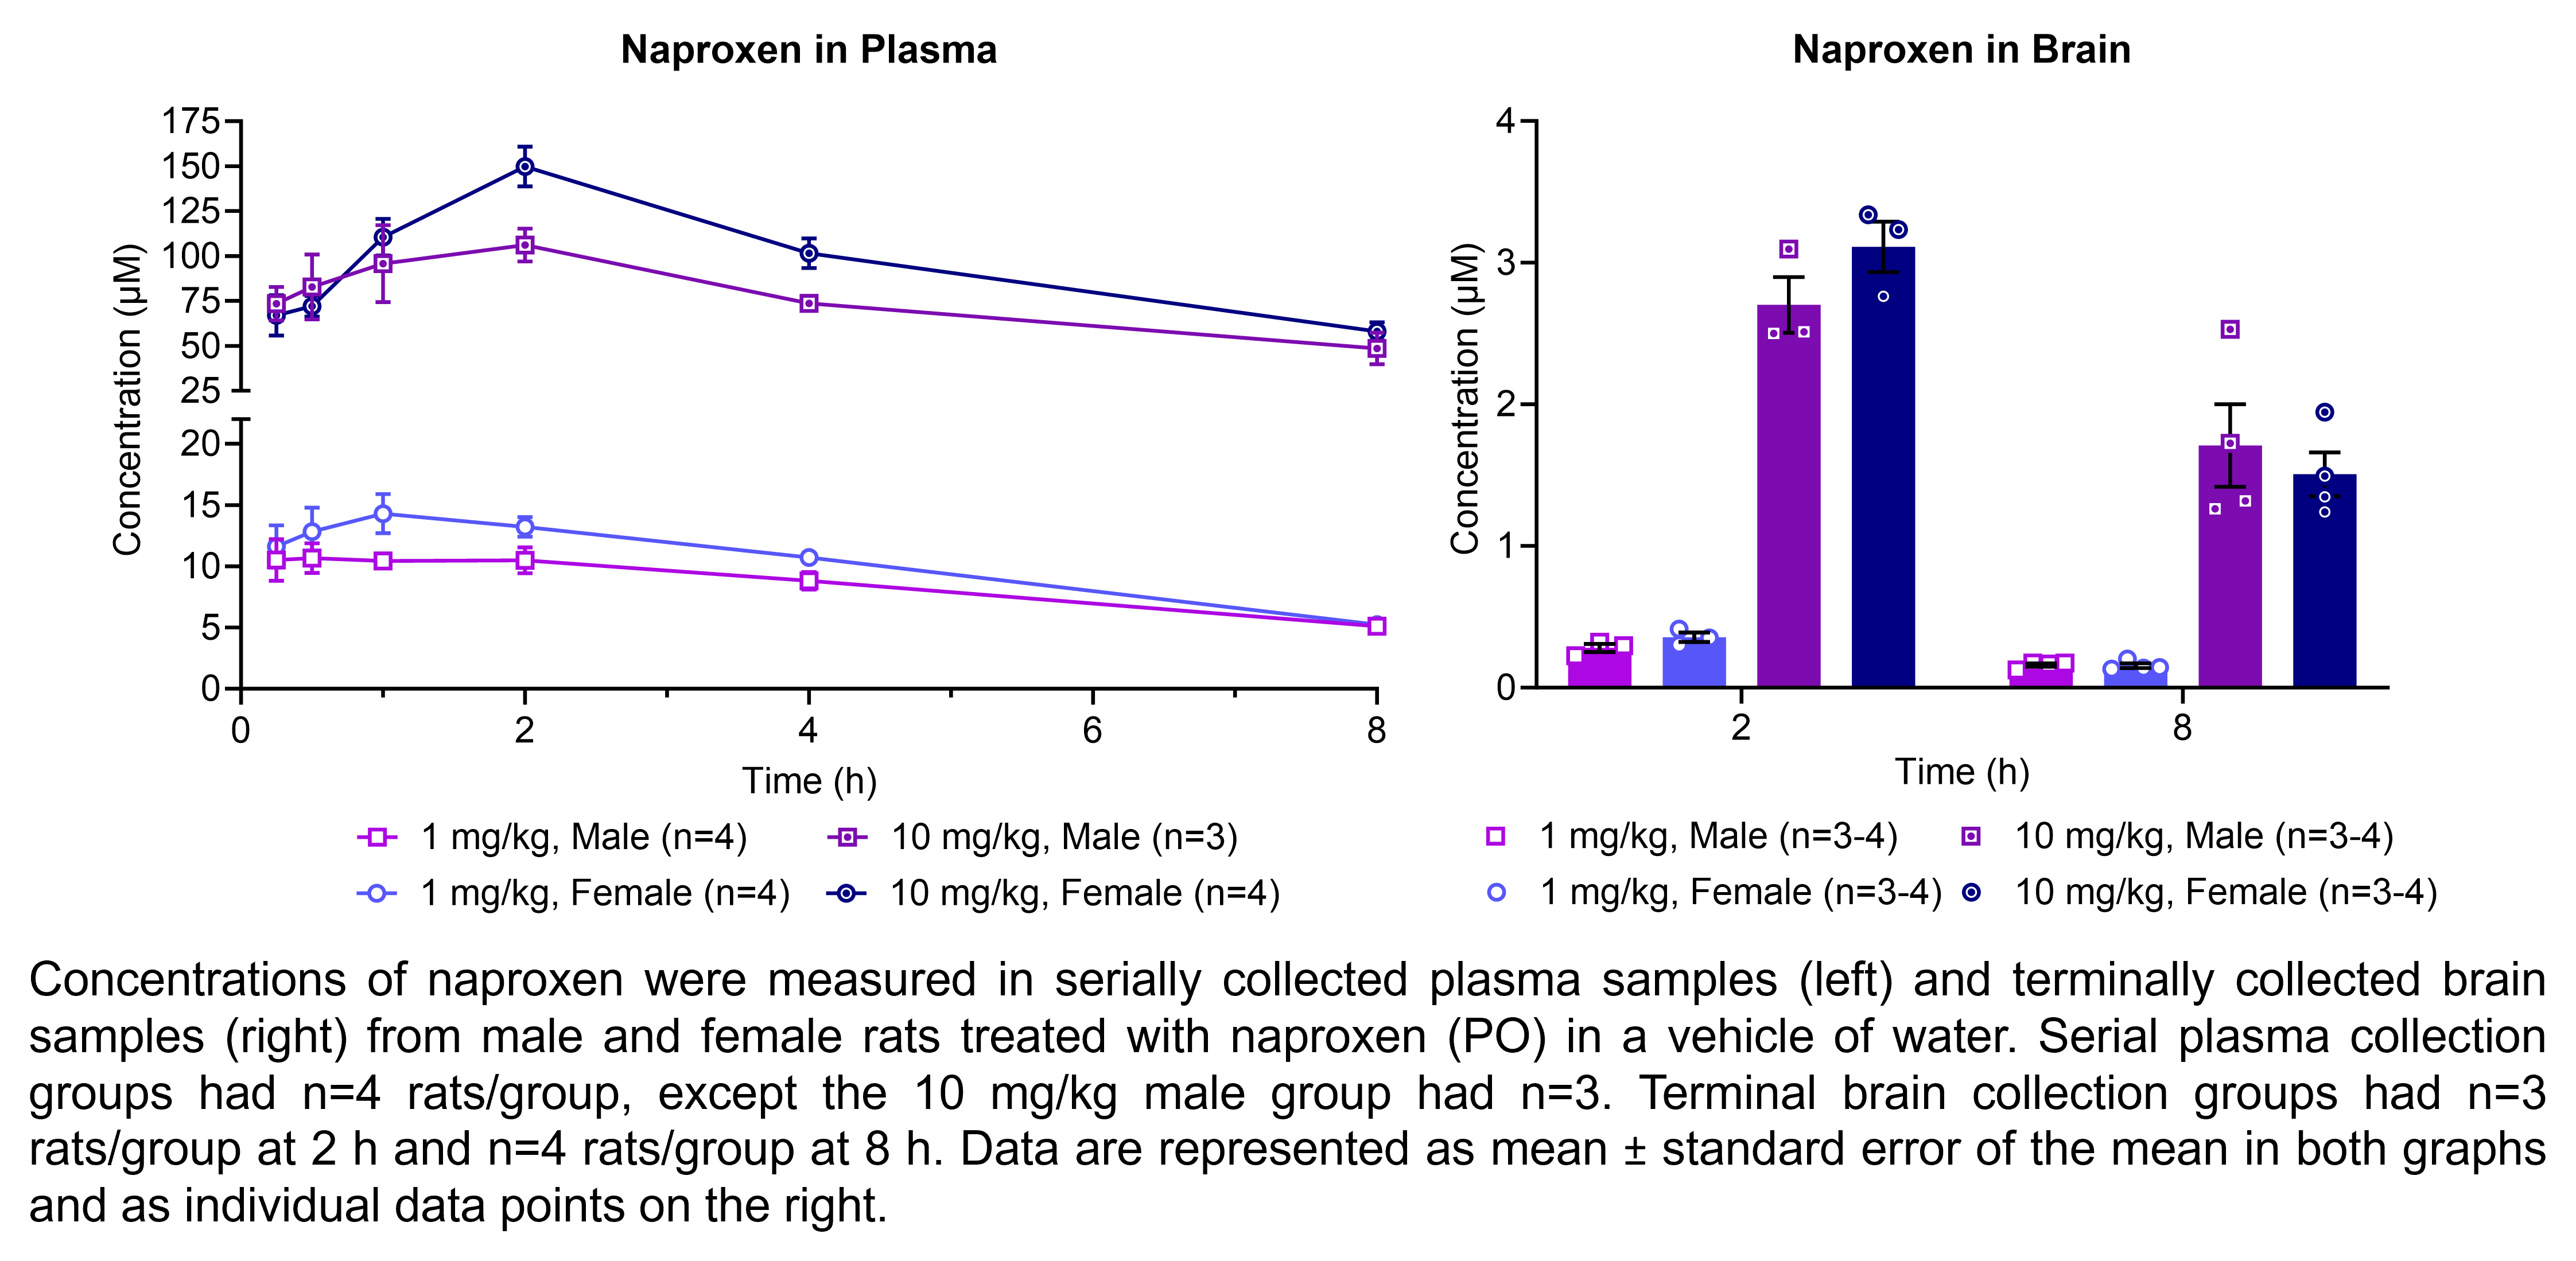 Naproxen concentrations were measured in serially collected plasma samples and terminally collected brain samples (shown on two graphs) from males and females treated with 1 or 10 mg/kg naproxen (PO) in a vehicle of water. There were 3-4 rats/group.